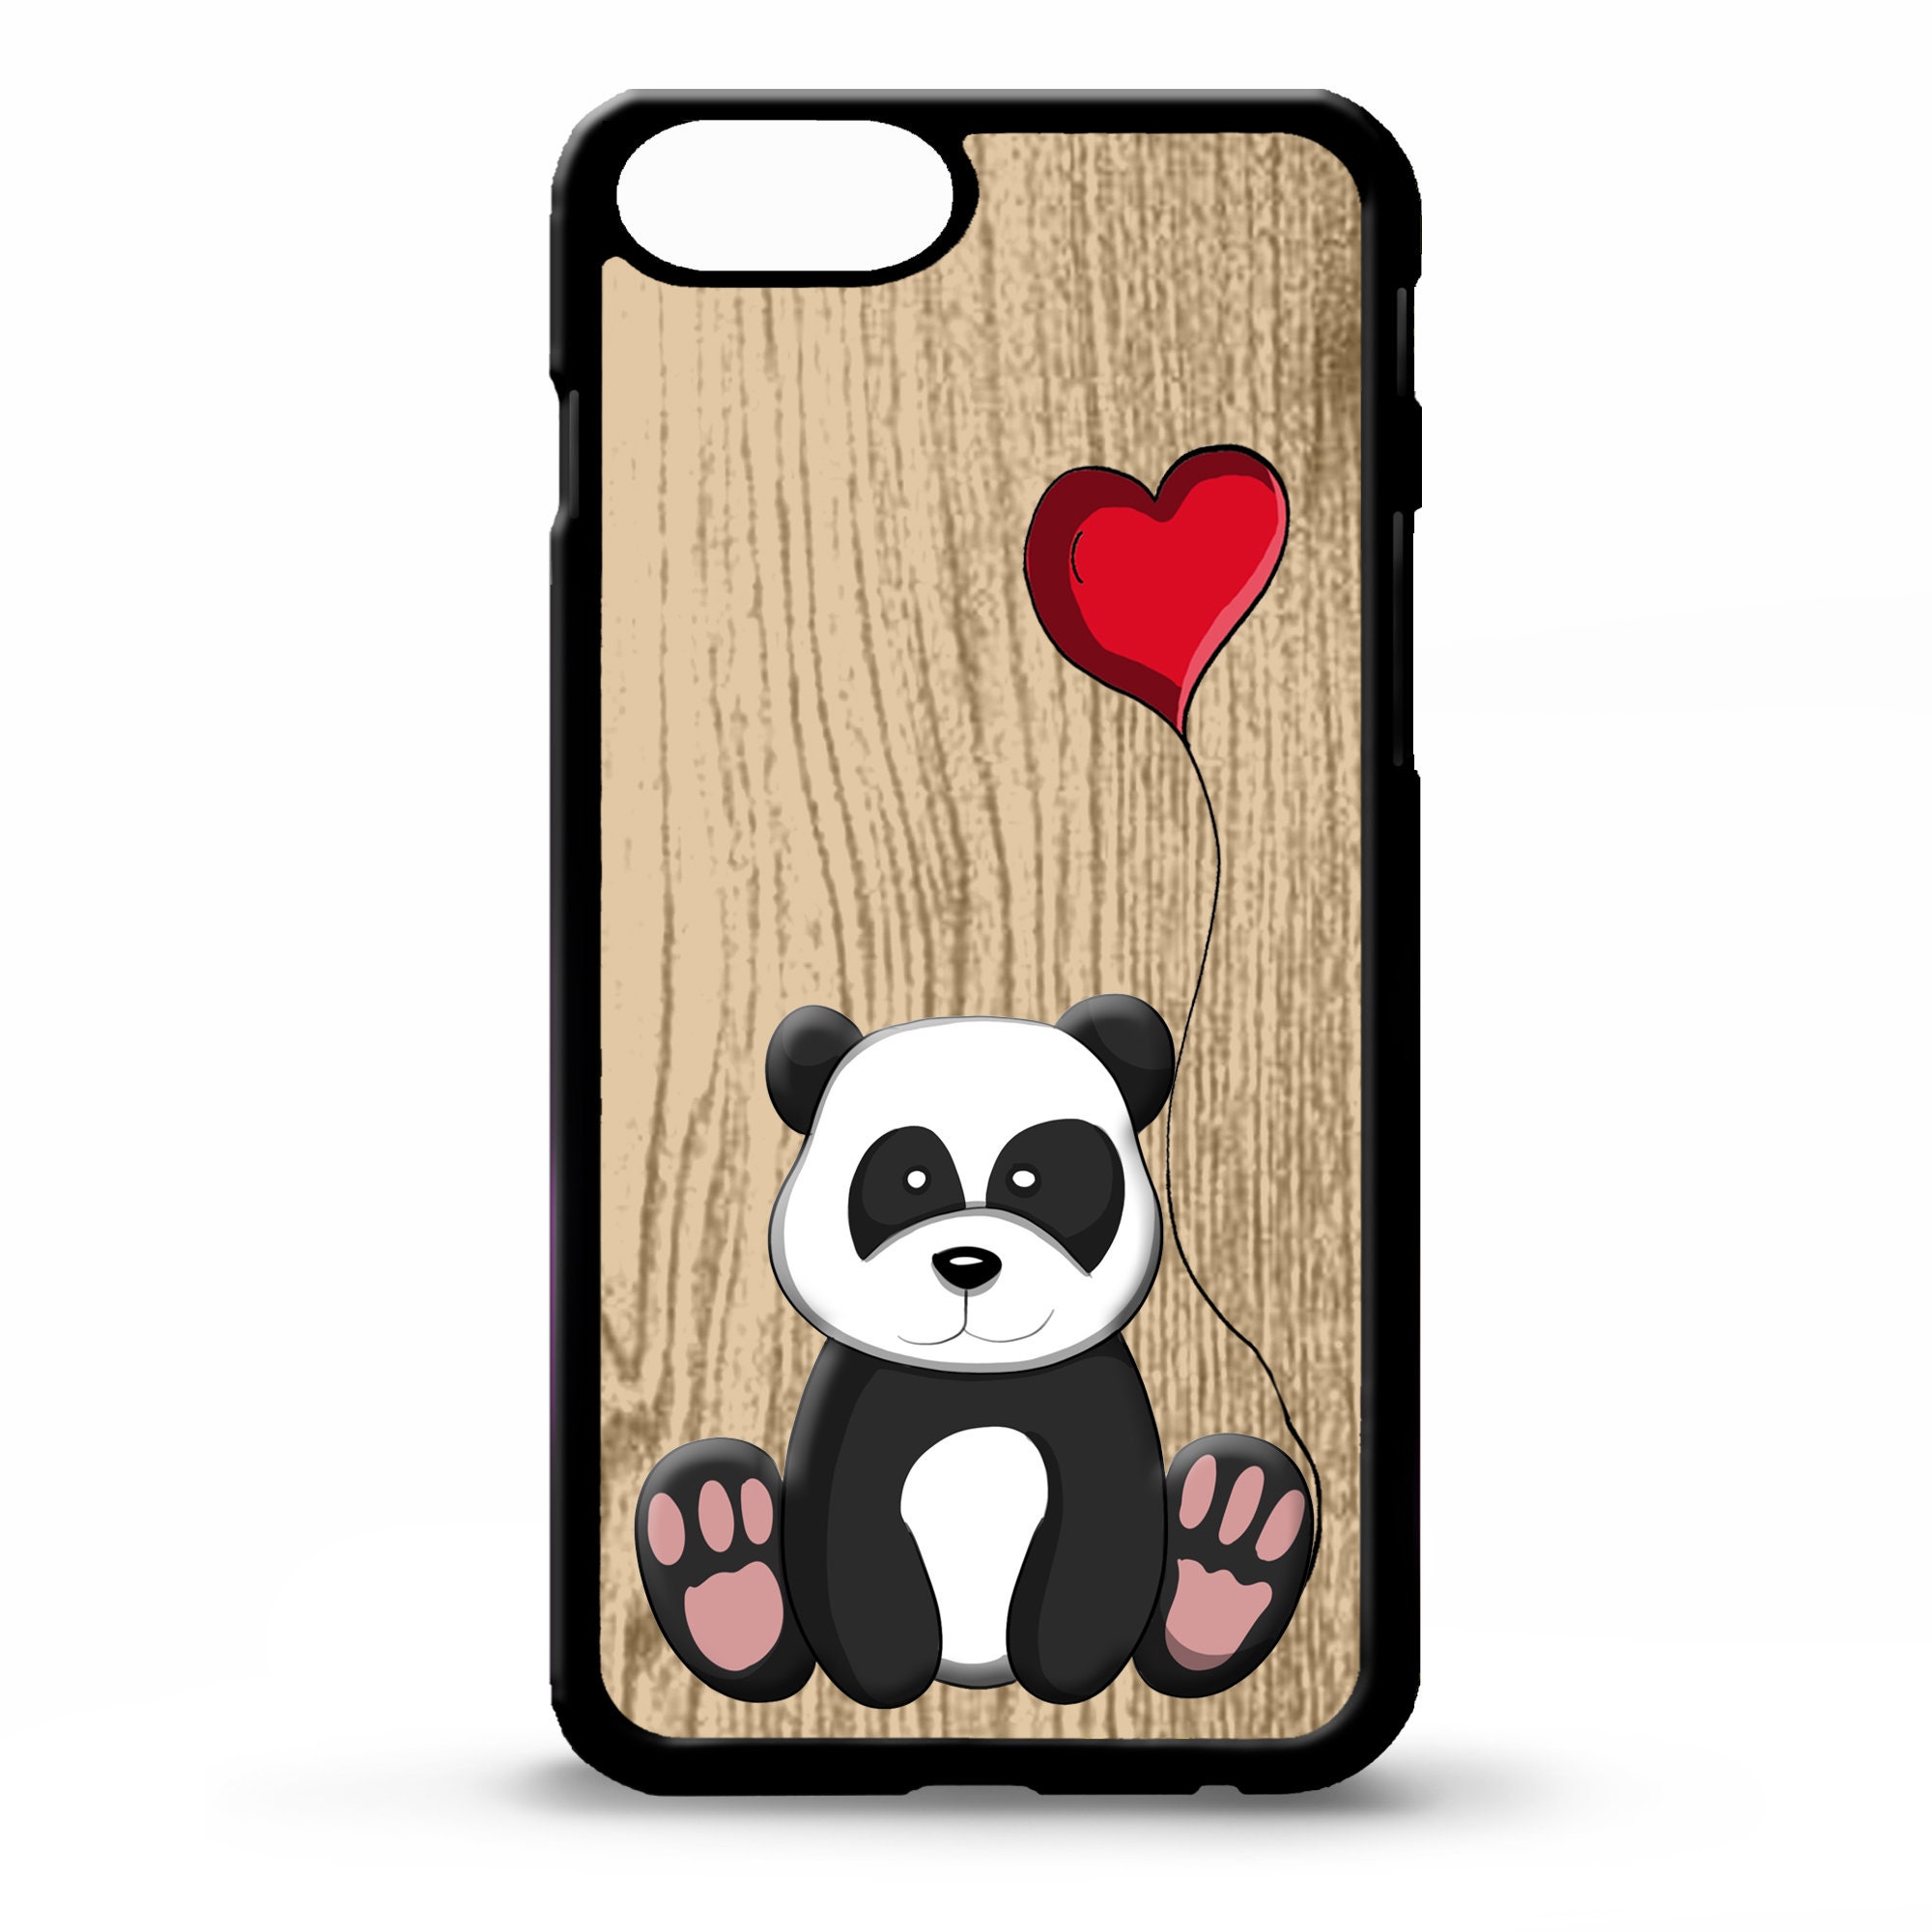 Koala bear cute cartoon graphic art personalised name phone cover for samsung galaxy s8 s9 s10 s10e s20 s21 plus ultra phone case